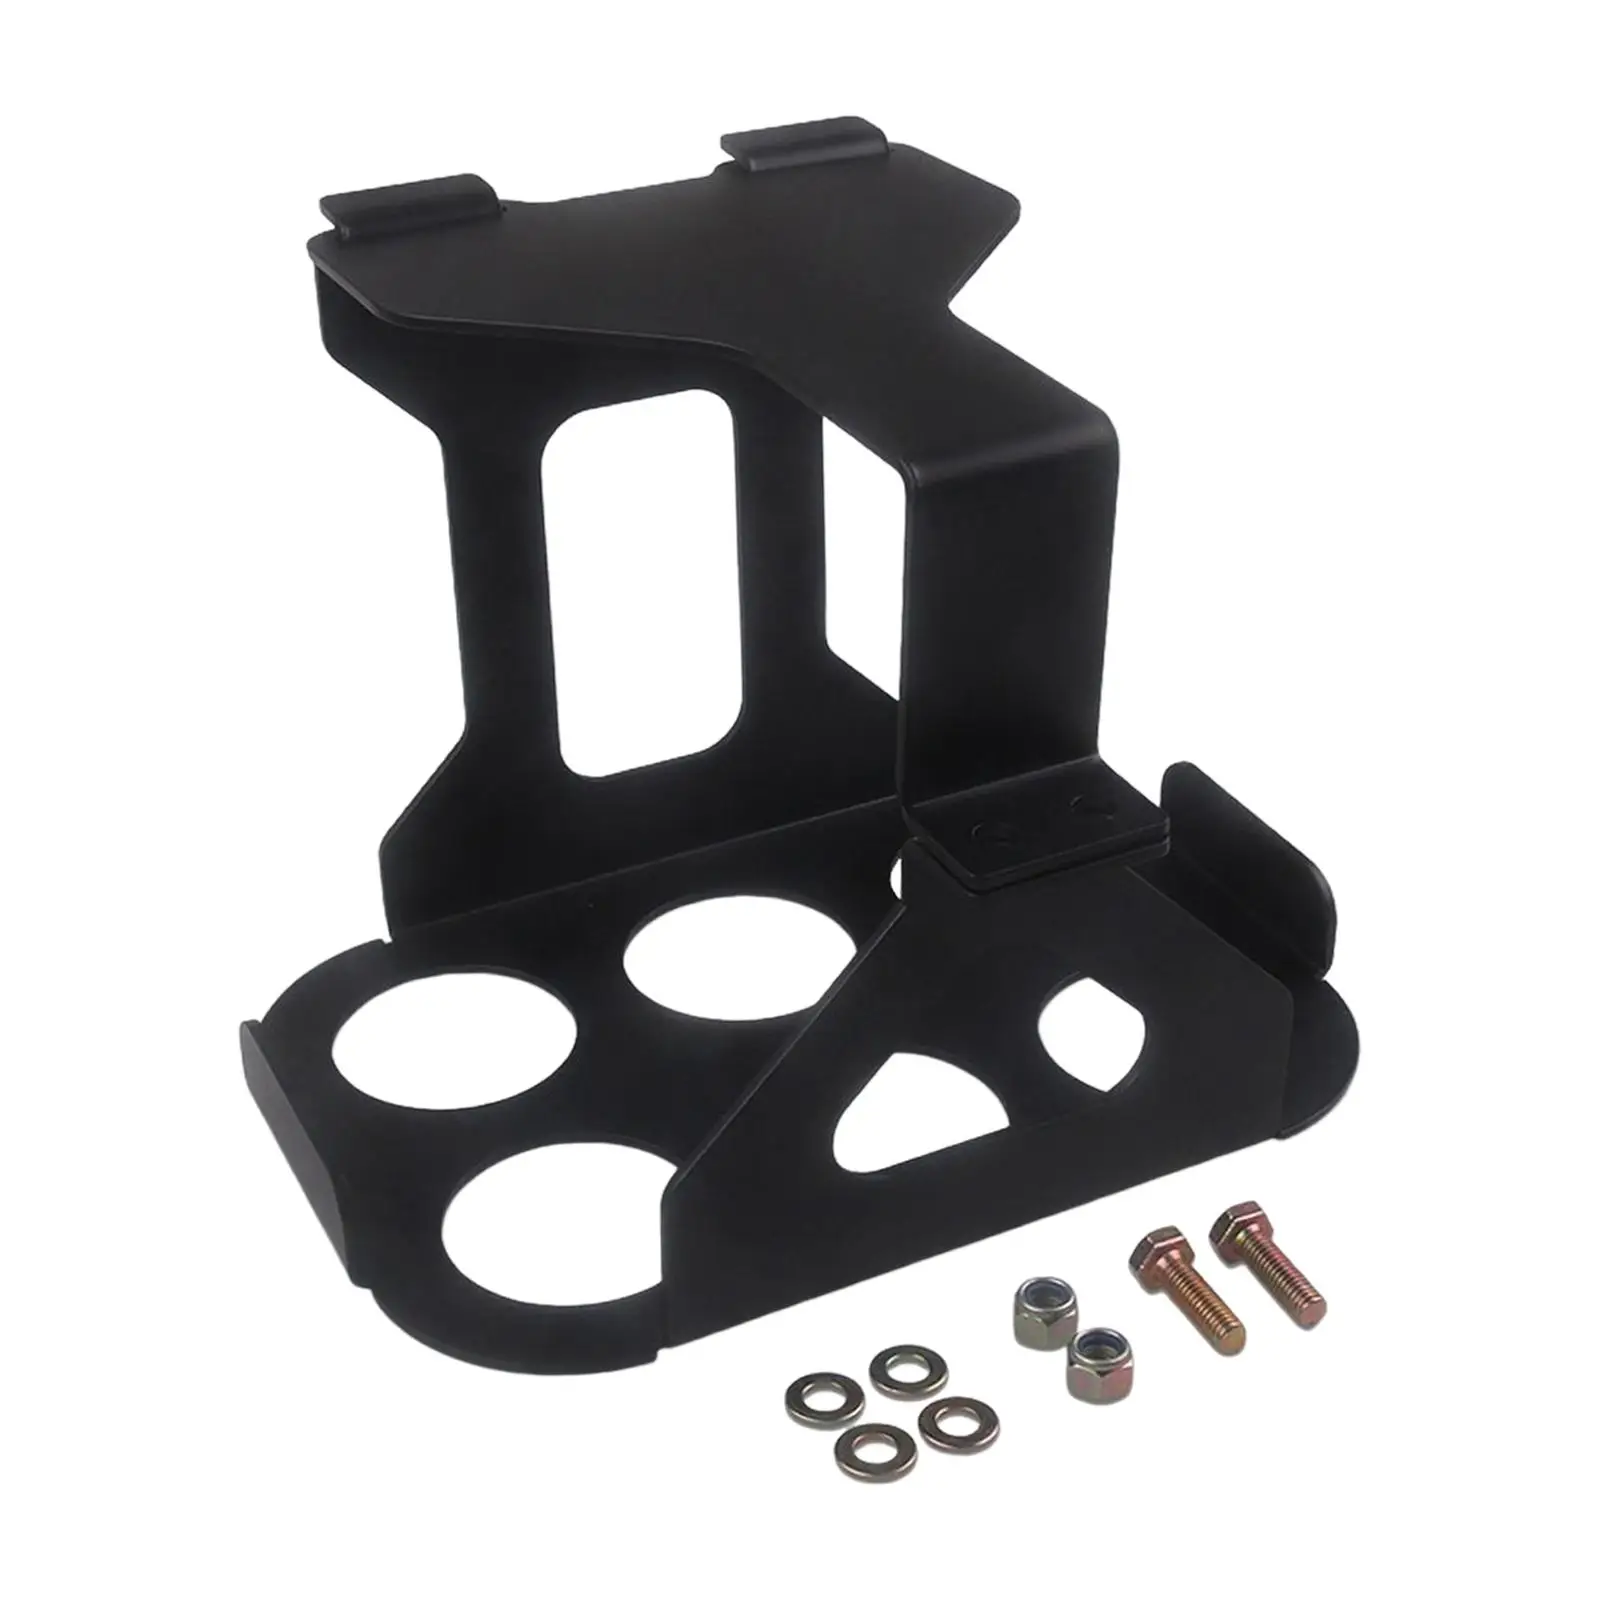 Black Battery Box Tray Easy Installation Durable Metal Truck Battery Mount for